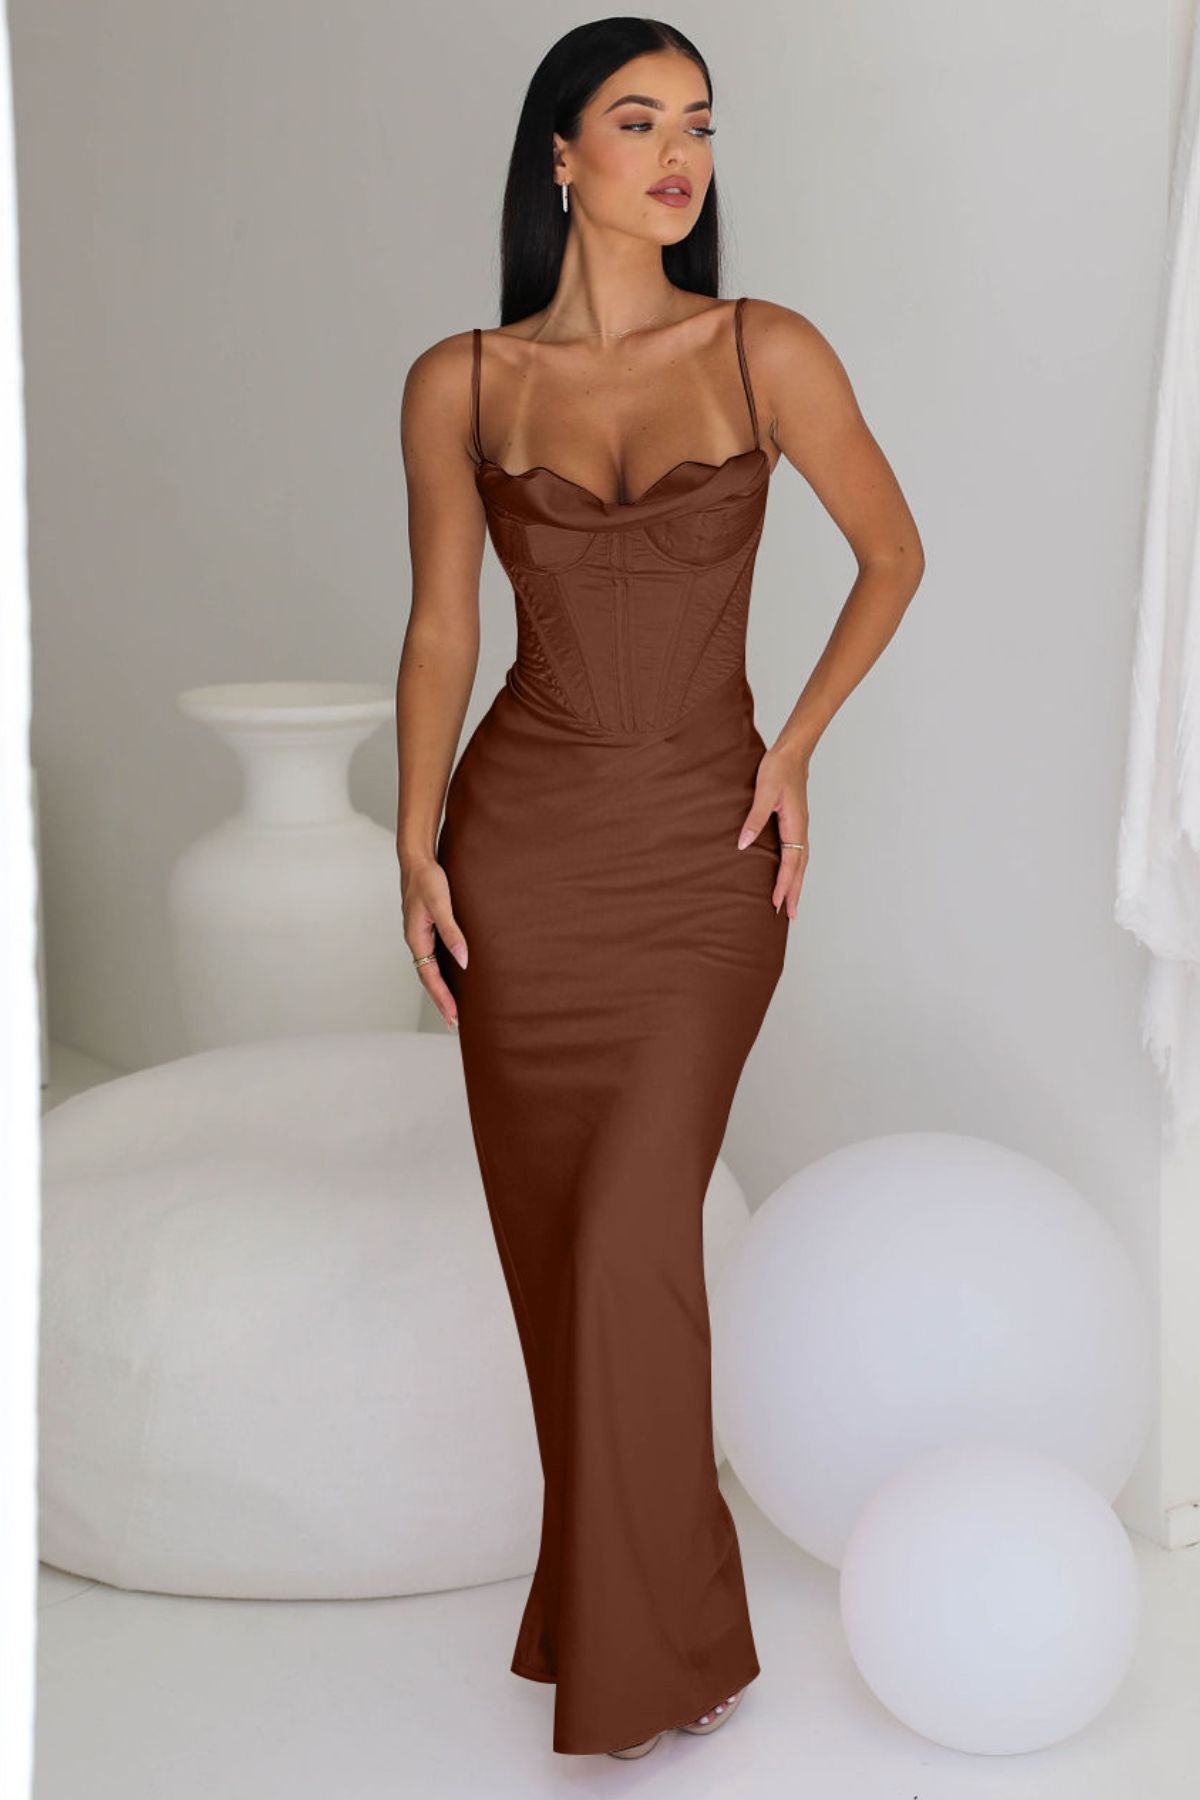 Rent HOUSE OF CB Charmaine Corset Gown (Chocolate) - Rent this